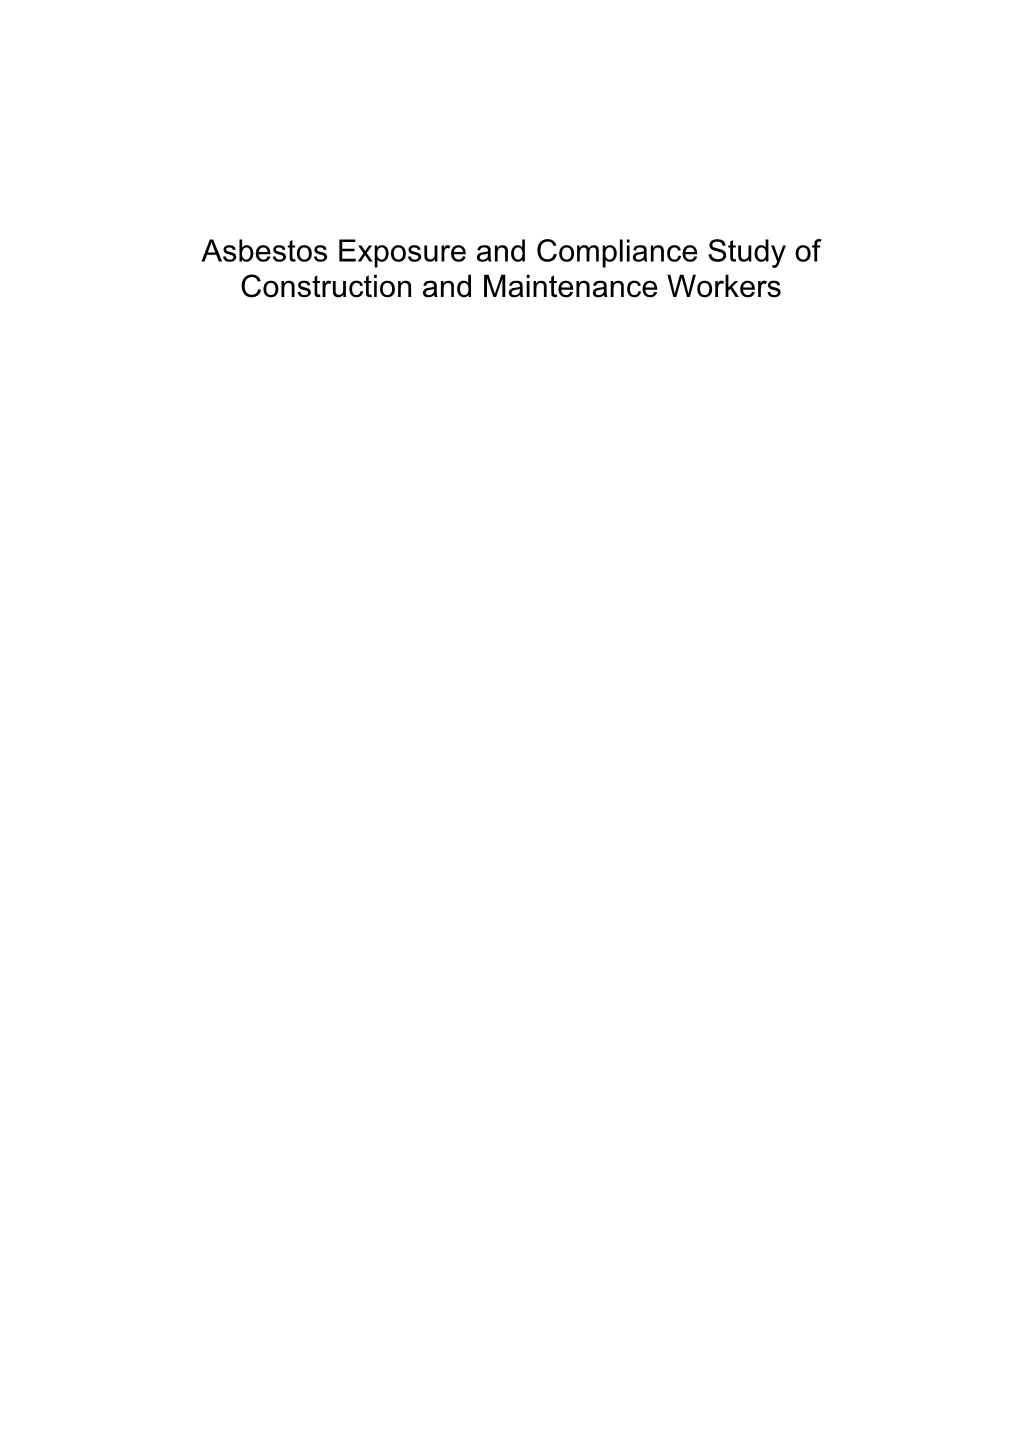 Asbestos Exposure and Compliance Study of Construction and Maintenance Workers